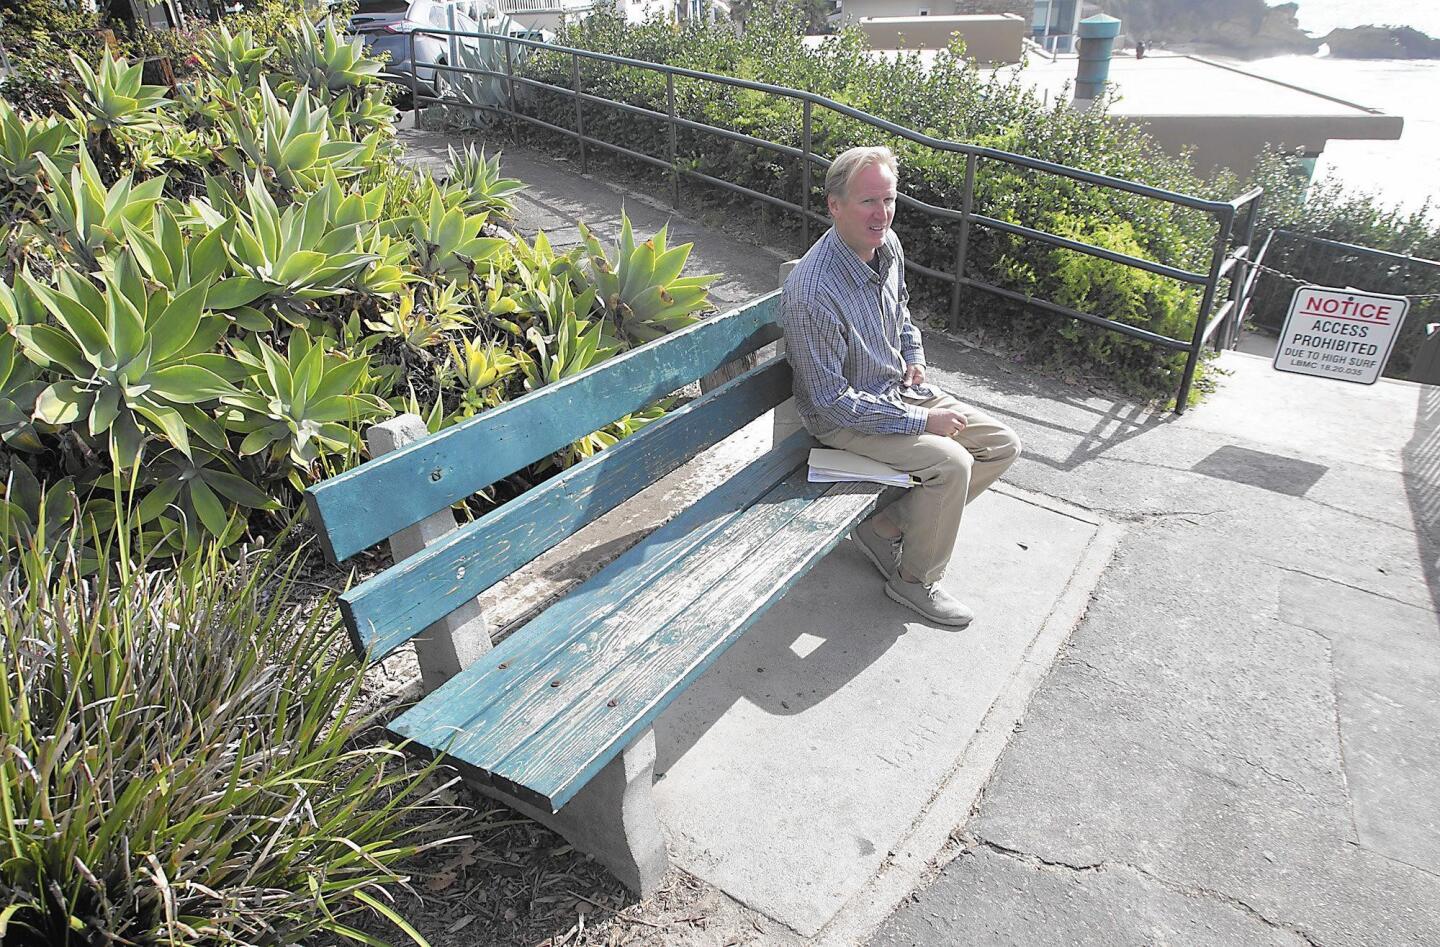 Resident Peter Mann sits on the bench at the Agate Street lookout where stairs leading to the beach have been damaged by large waves and high tides. The city plans to refurbish the stairs and landscape, which Mann says will compromise views.